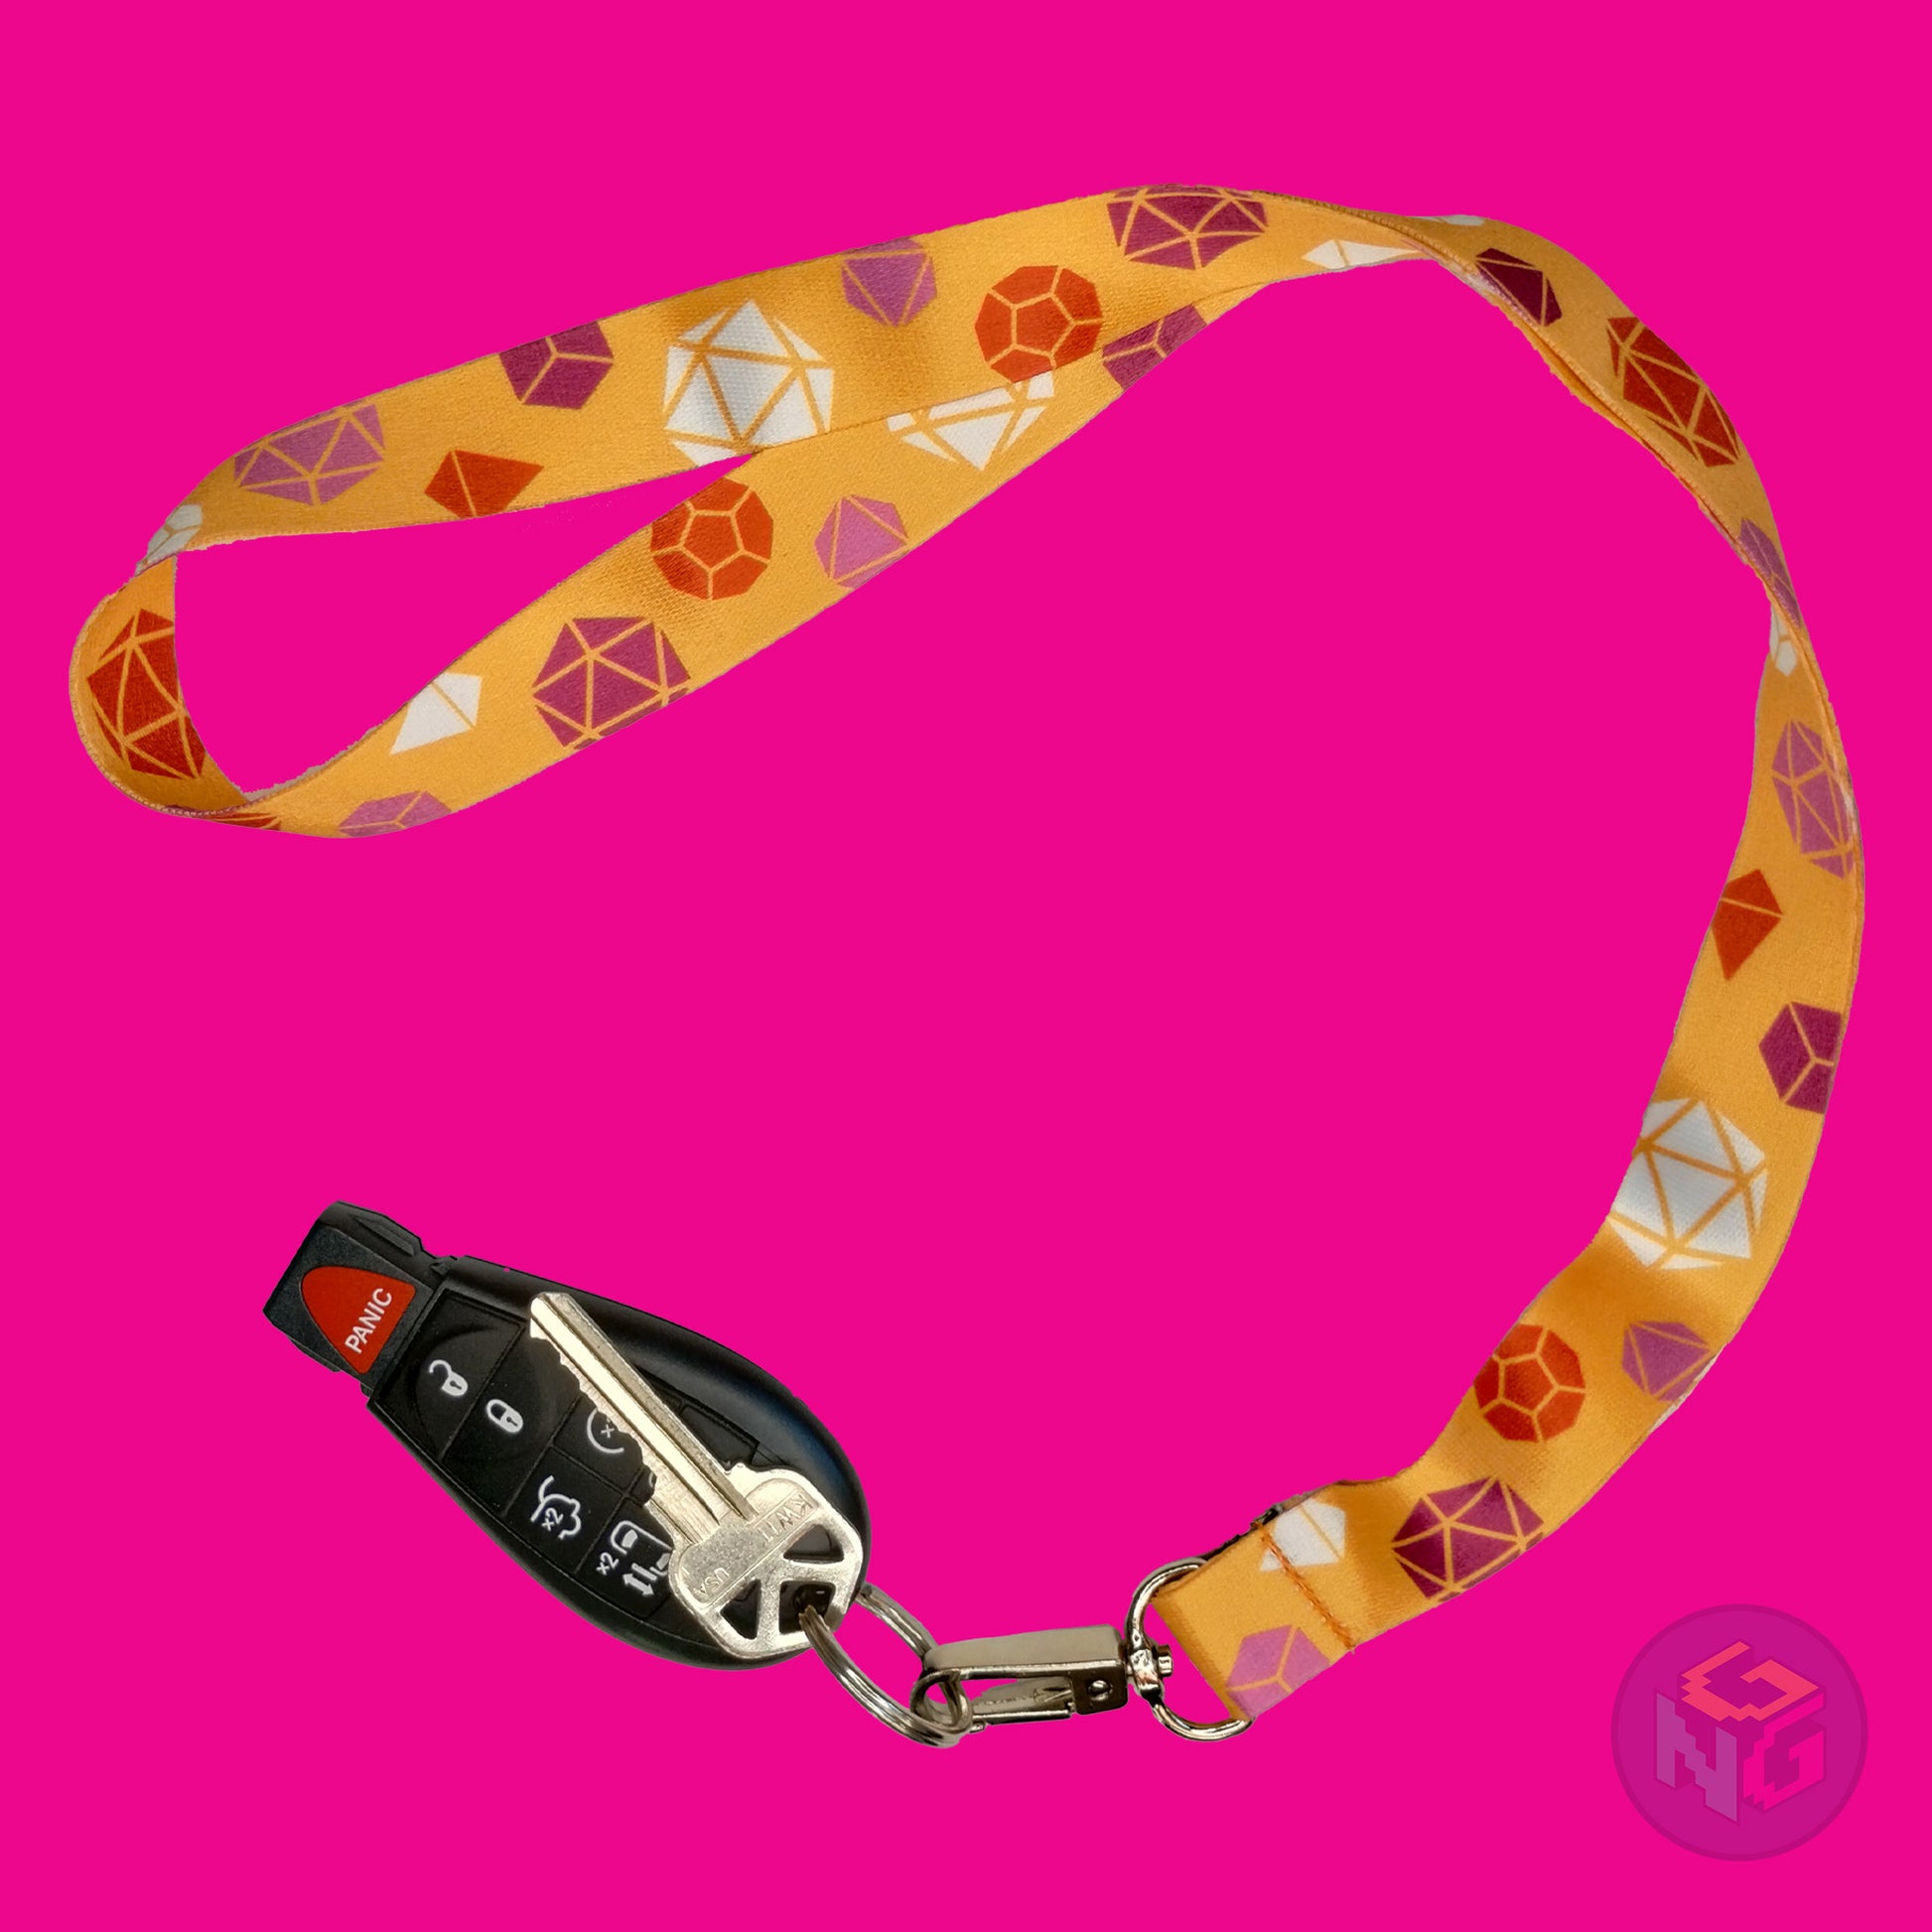 orange dnd lesbian lanyard showing the pink, orange, and white tabletop dice with a key fob clipped to the end of the lanyard